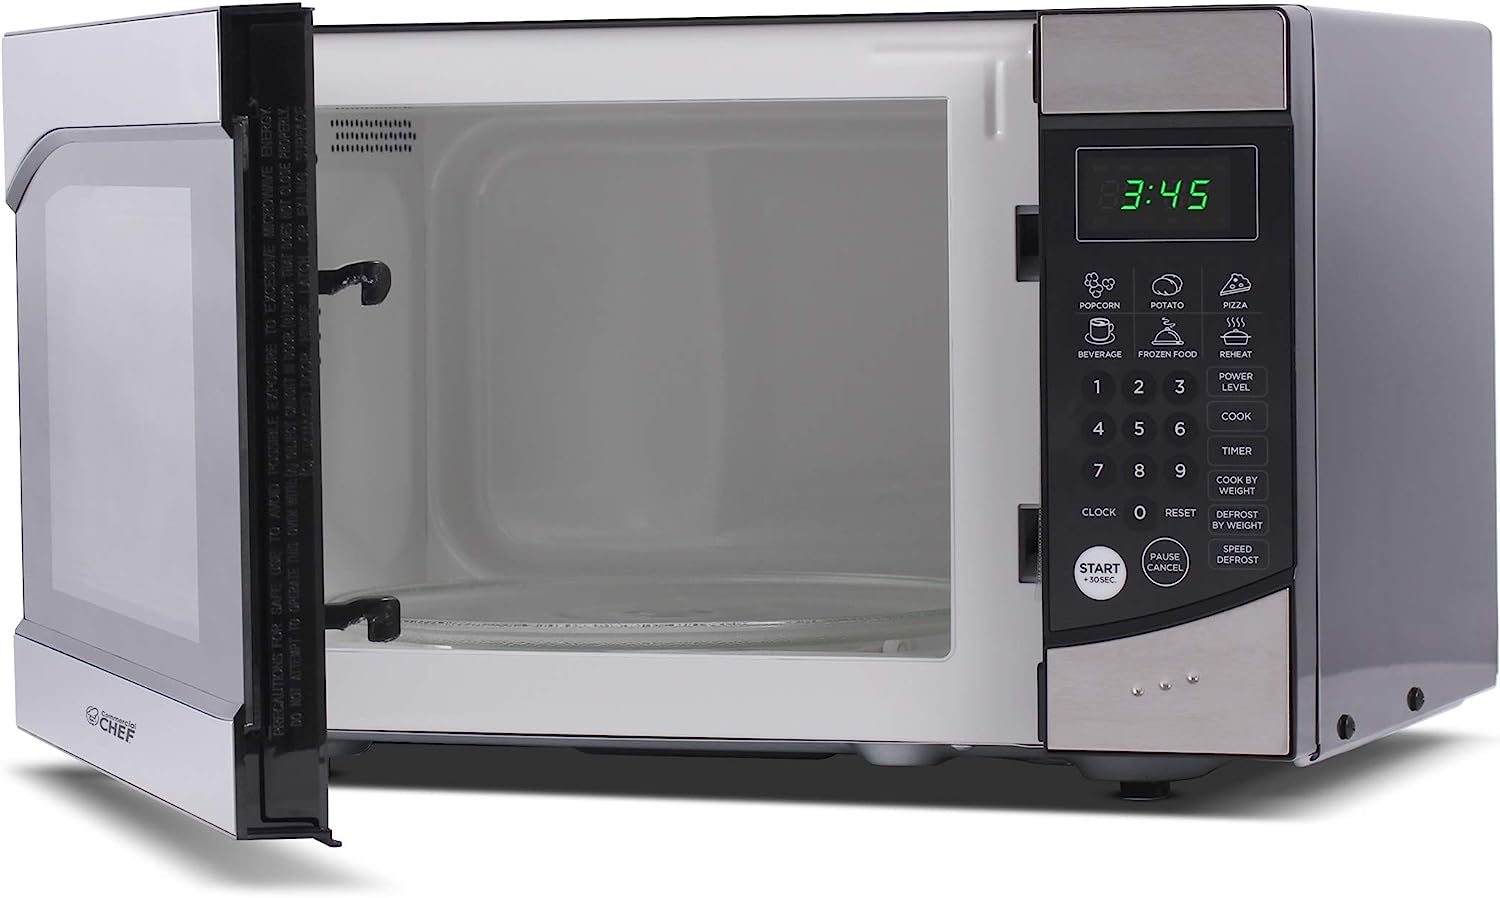 https://bigbigmart.com/wp-content/uploads/2023/07/Countertop-0.9-Cubic-Feet-Microwave-Oven-900-Watt-Stainless-Steel-Front-with-Black-Cabinet-Commercial-Chef-CHM0096.jpg